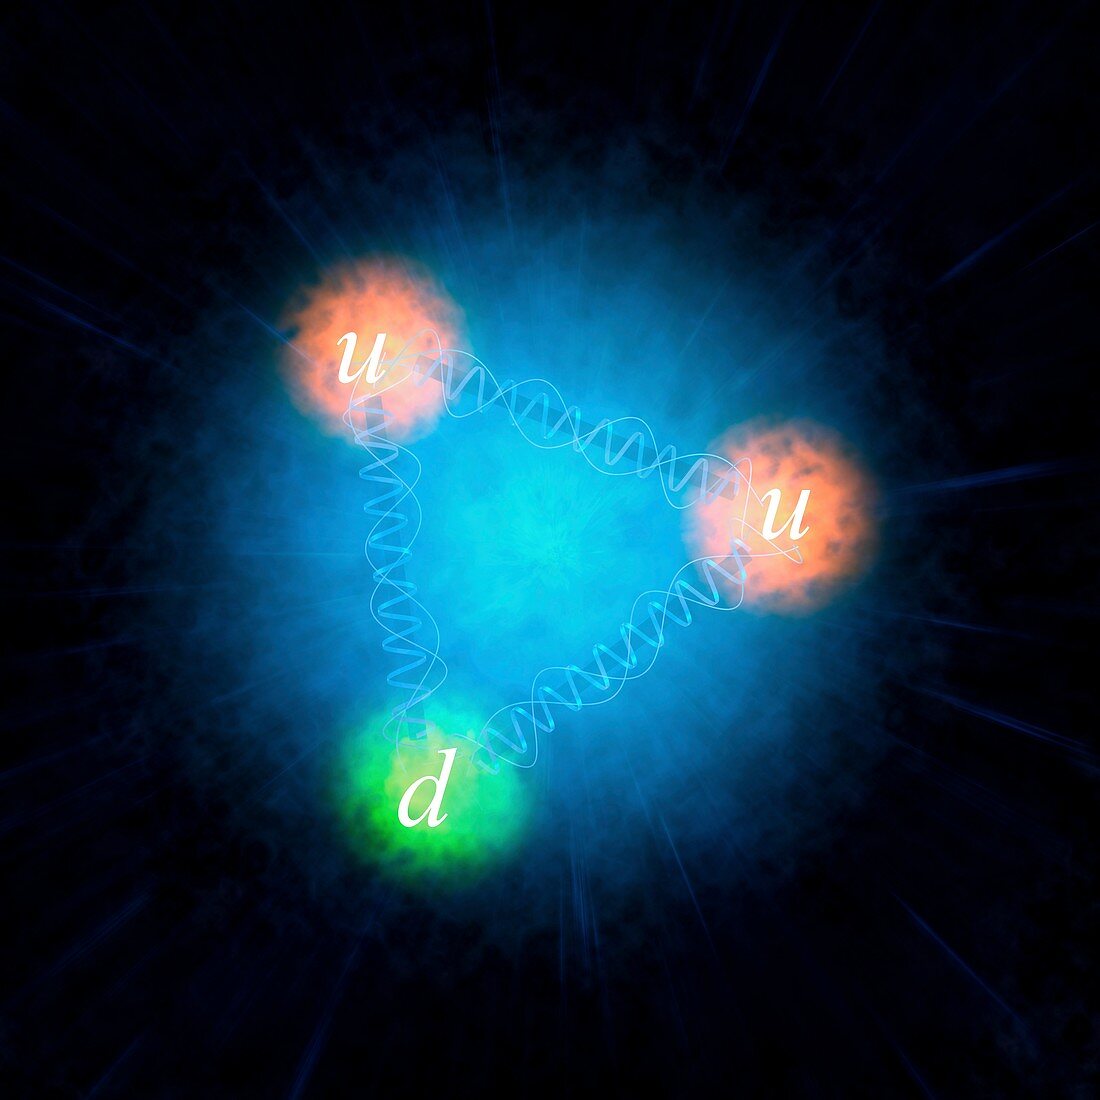 Artwork of the structure of a proton